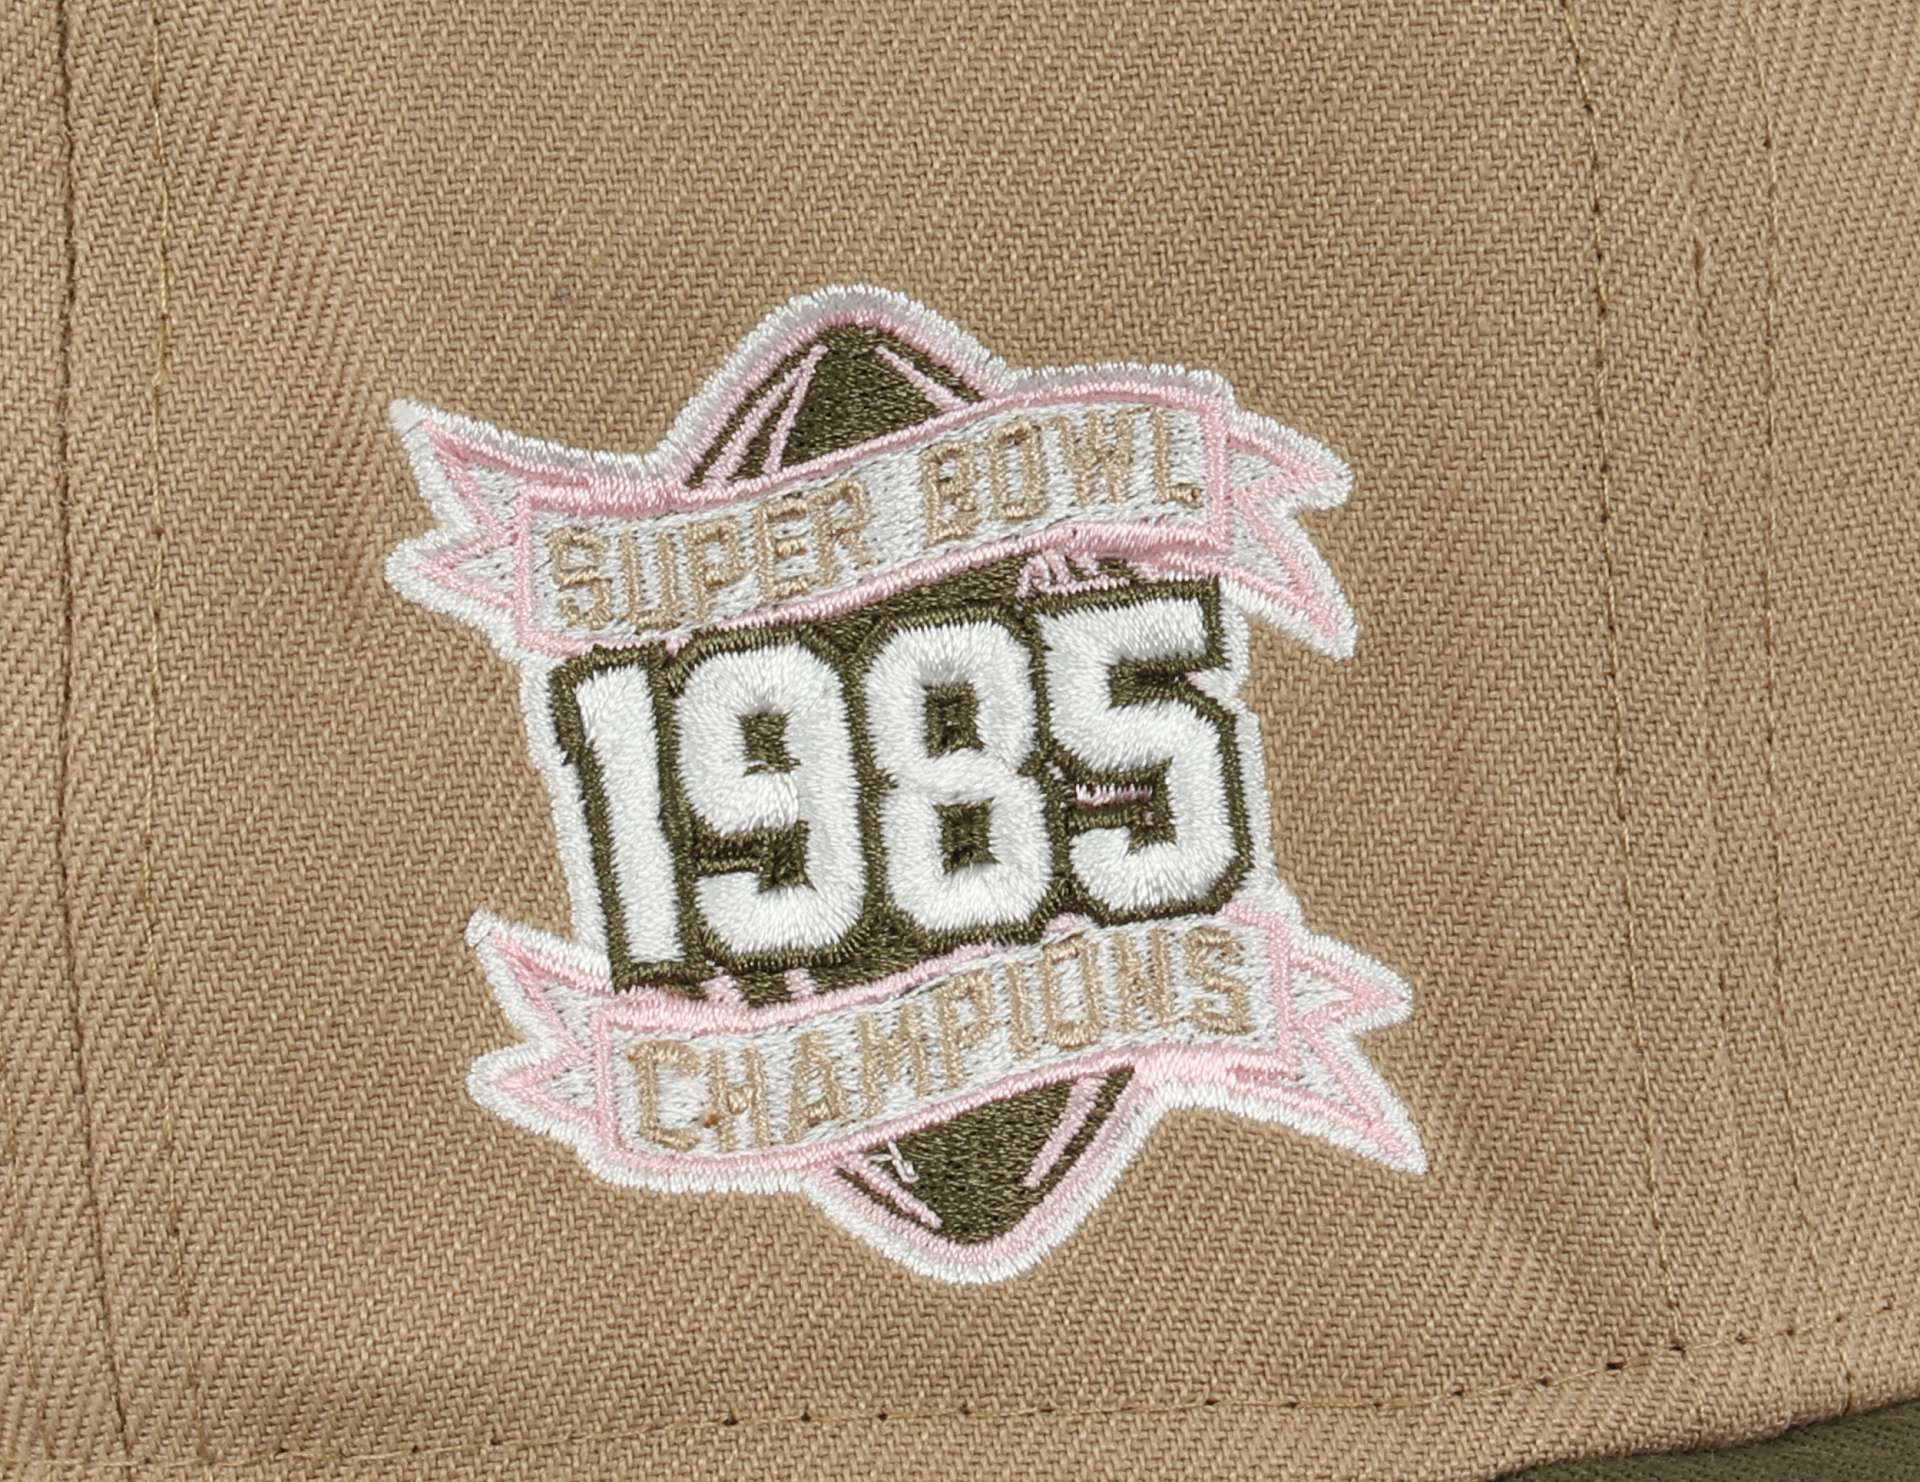 Chicago Bears NFL Superbowl 1985 Champions Sidepatch Camel Olive 59Fifty Basecap New Era